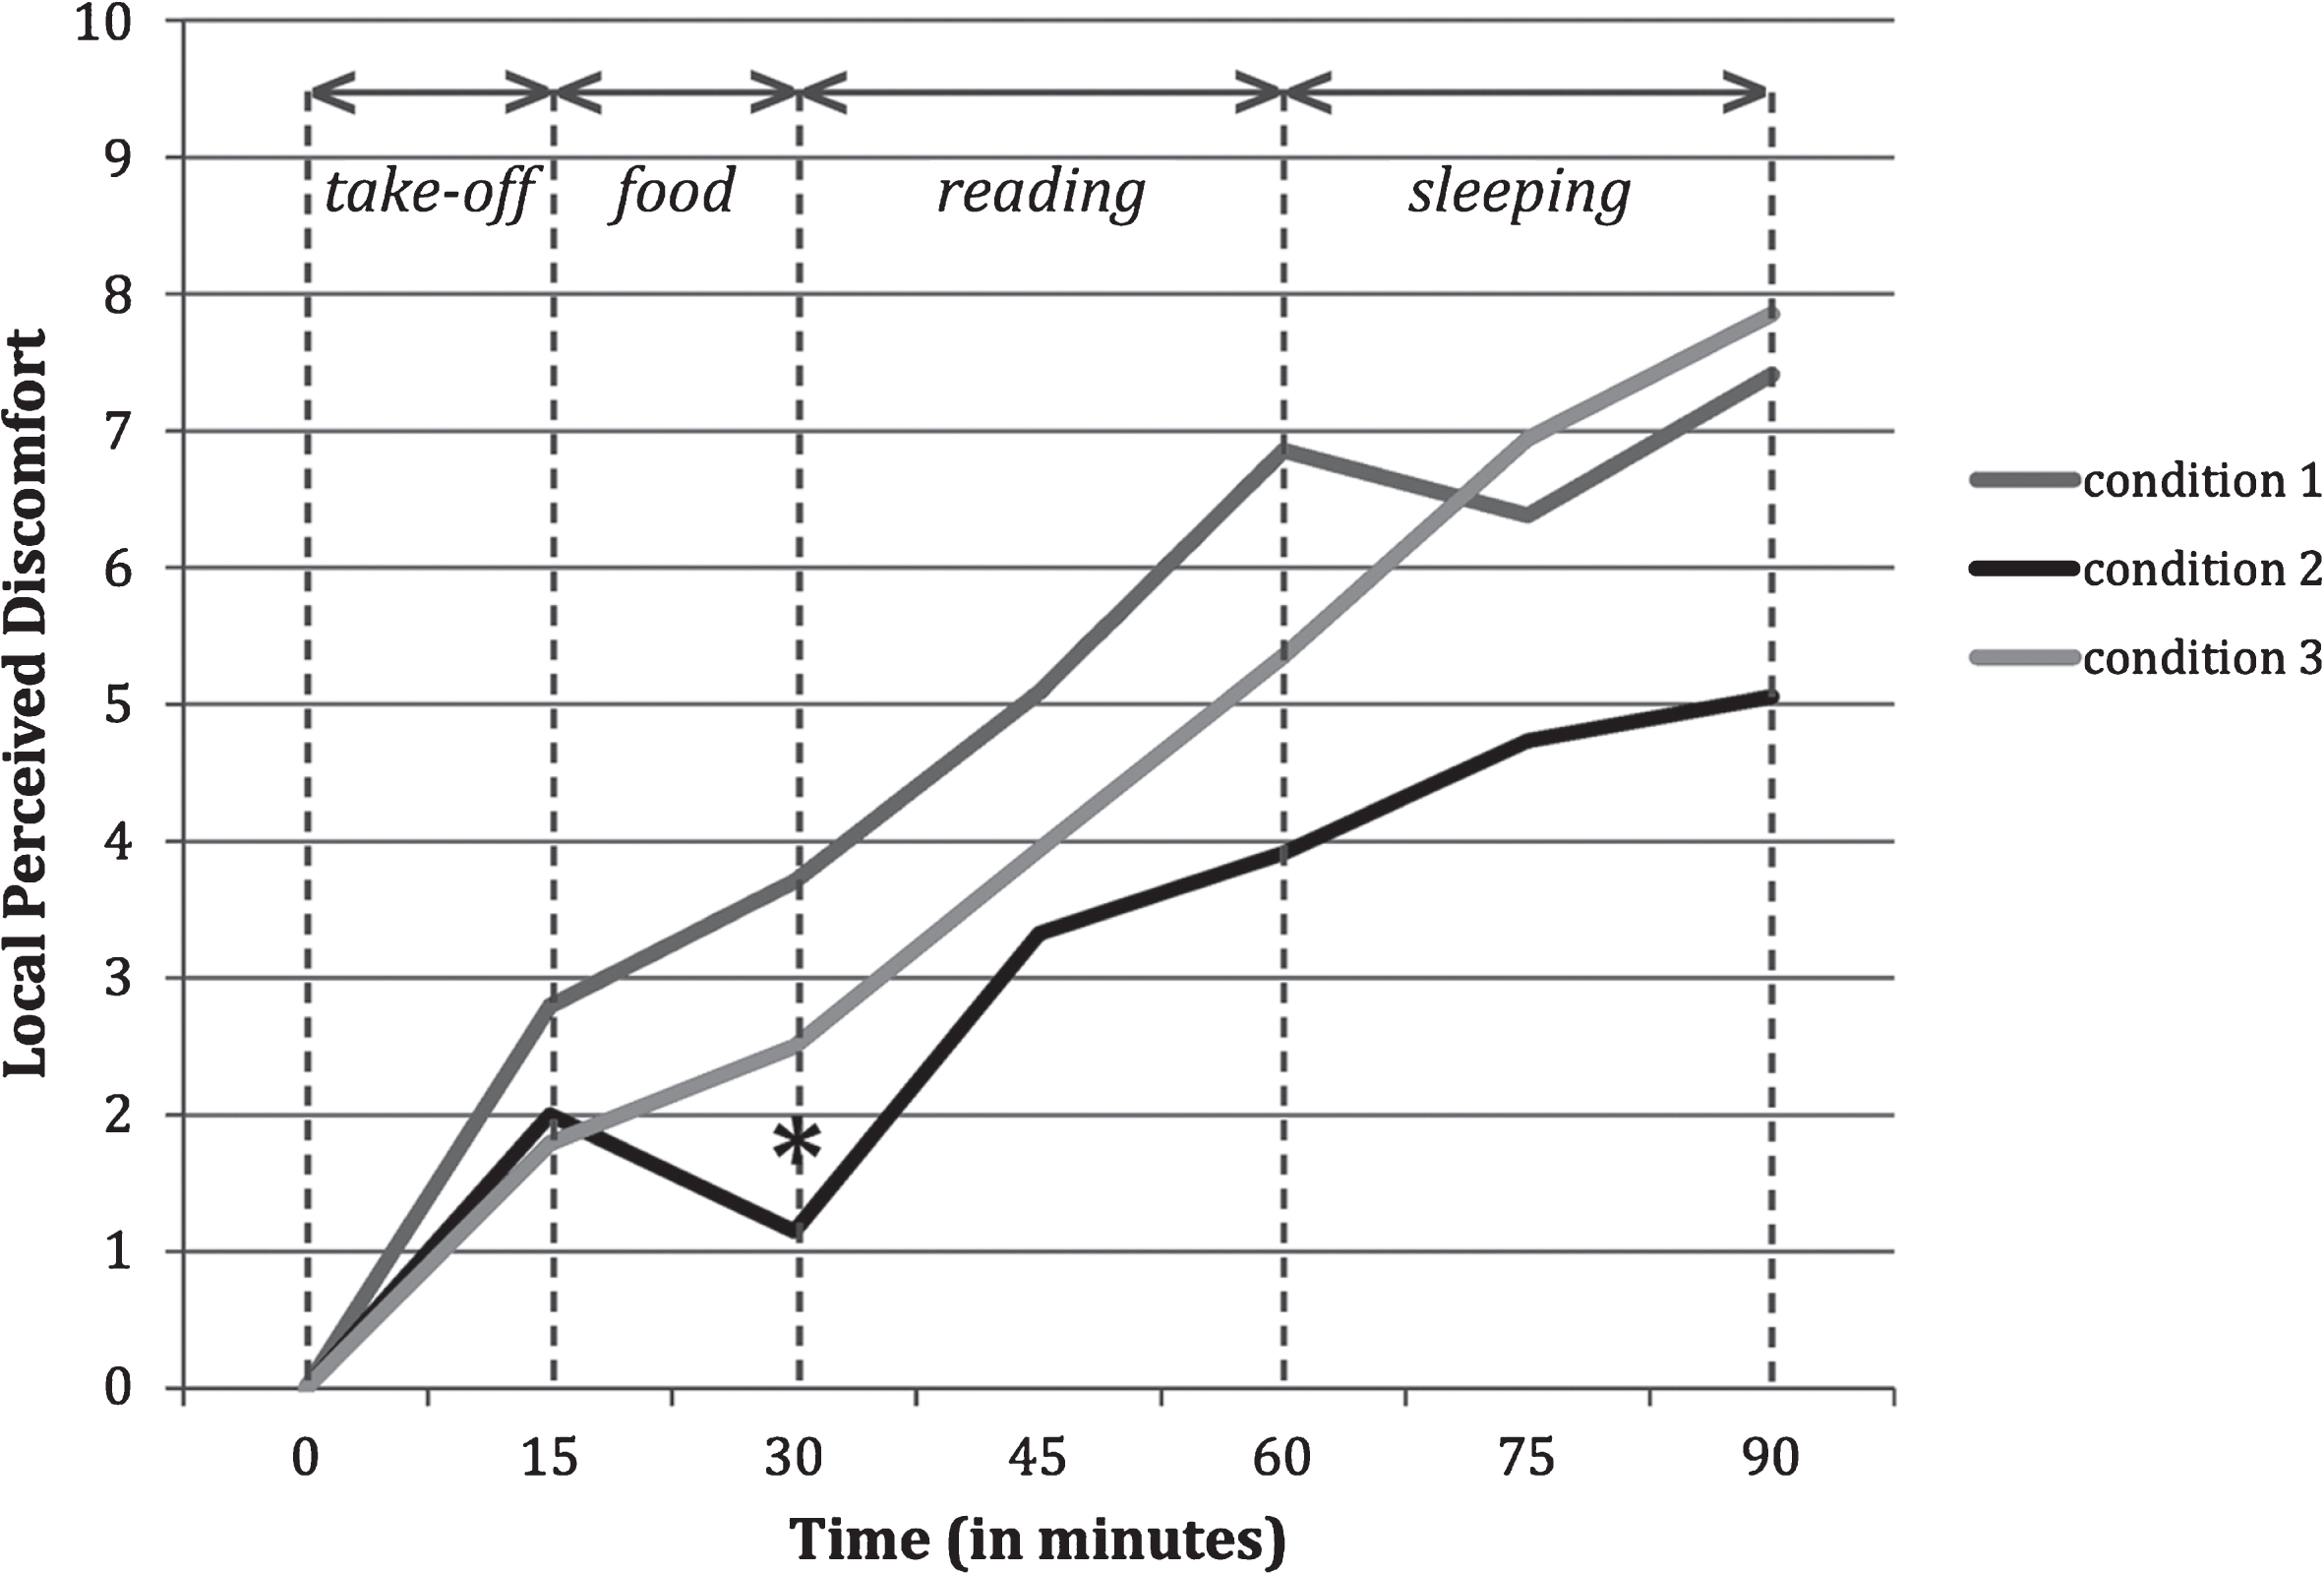 Development of Local Perceived Discomfort in time for each condition (condition 1 is the first condition, condition 3 is the last condition). The asterisk (*) indicates a significant difference (p < 0.01) at t = 30 min.